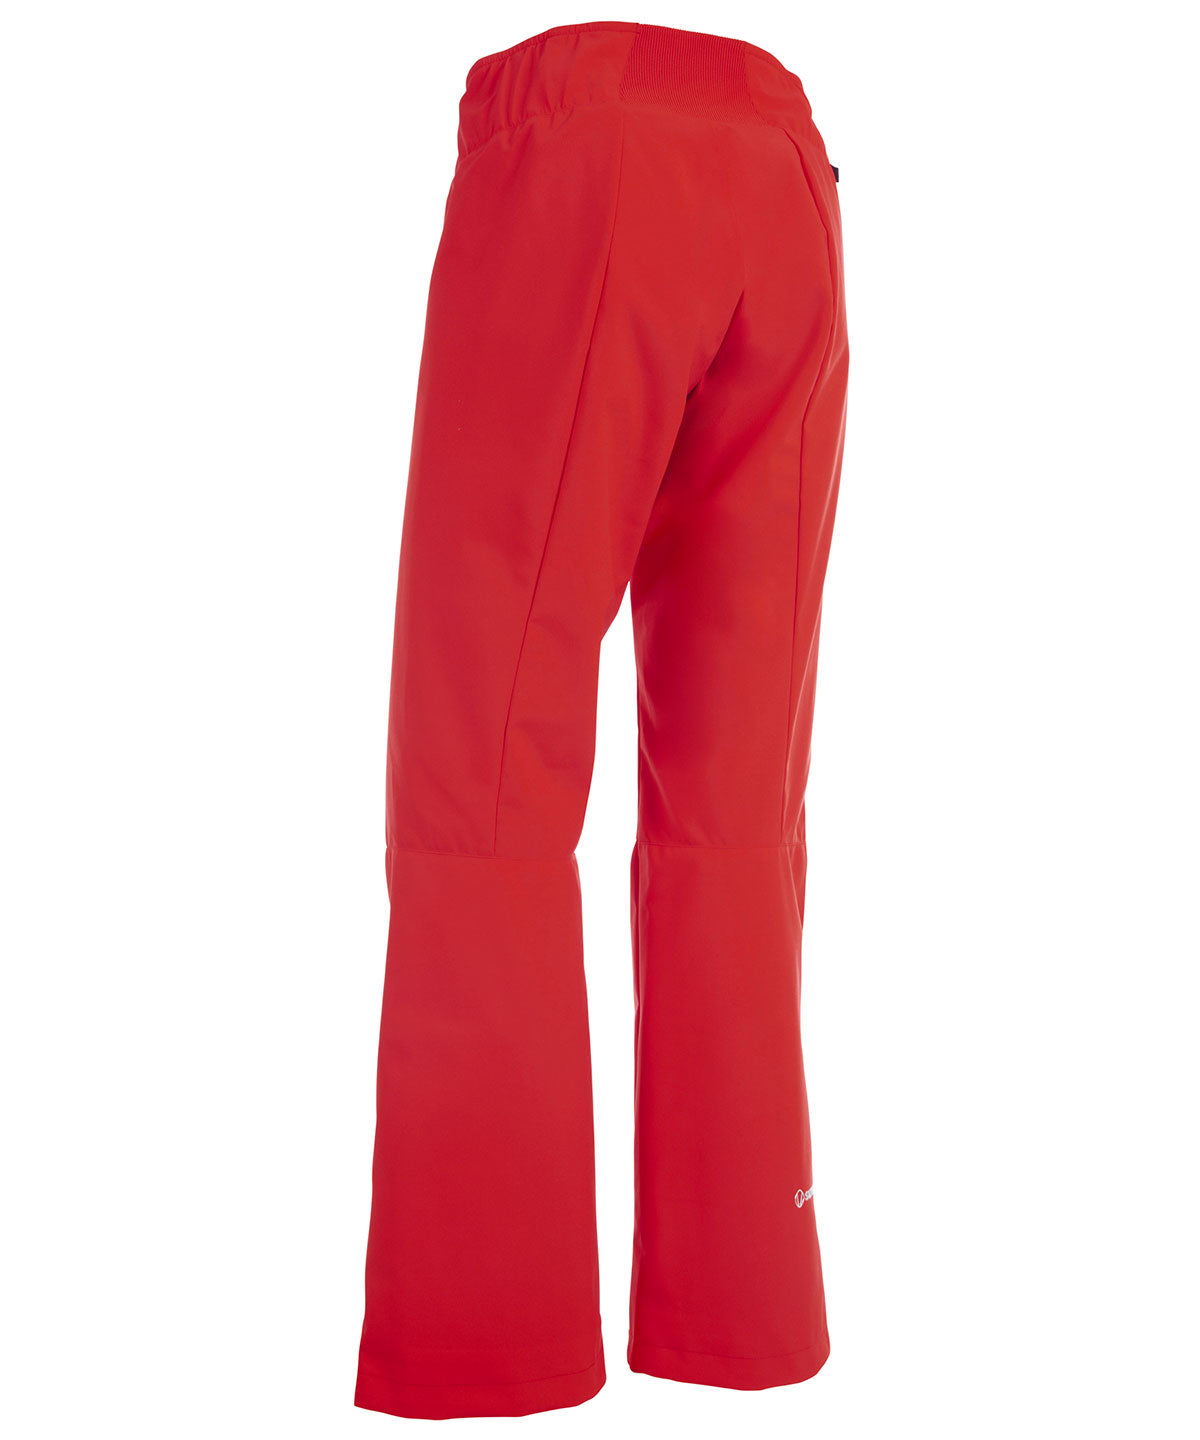 Poivre Blanc Womens Softshell Fitted Ski Pant in Scarlet Red